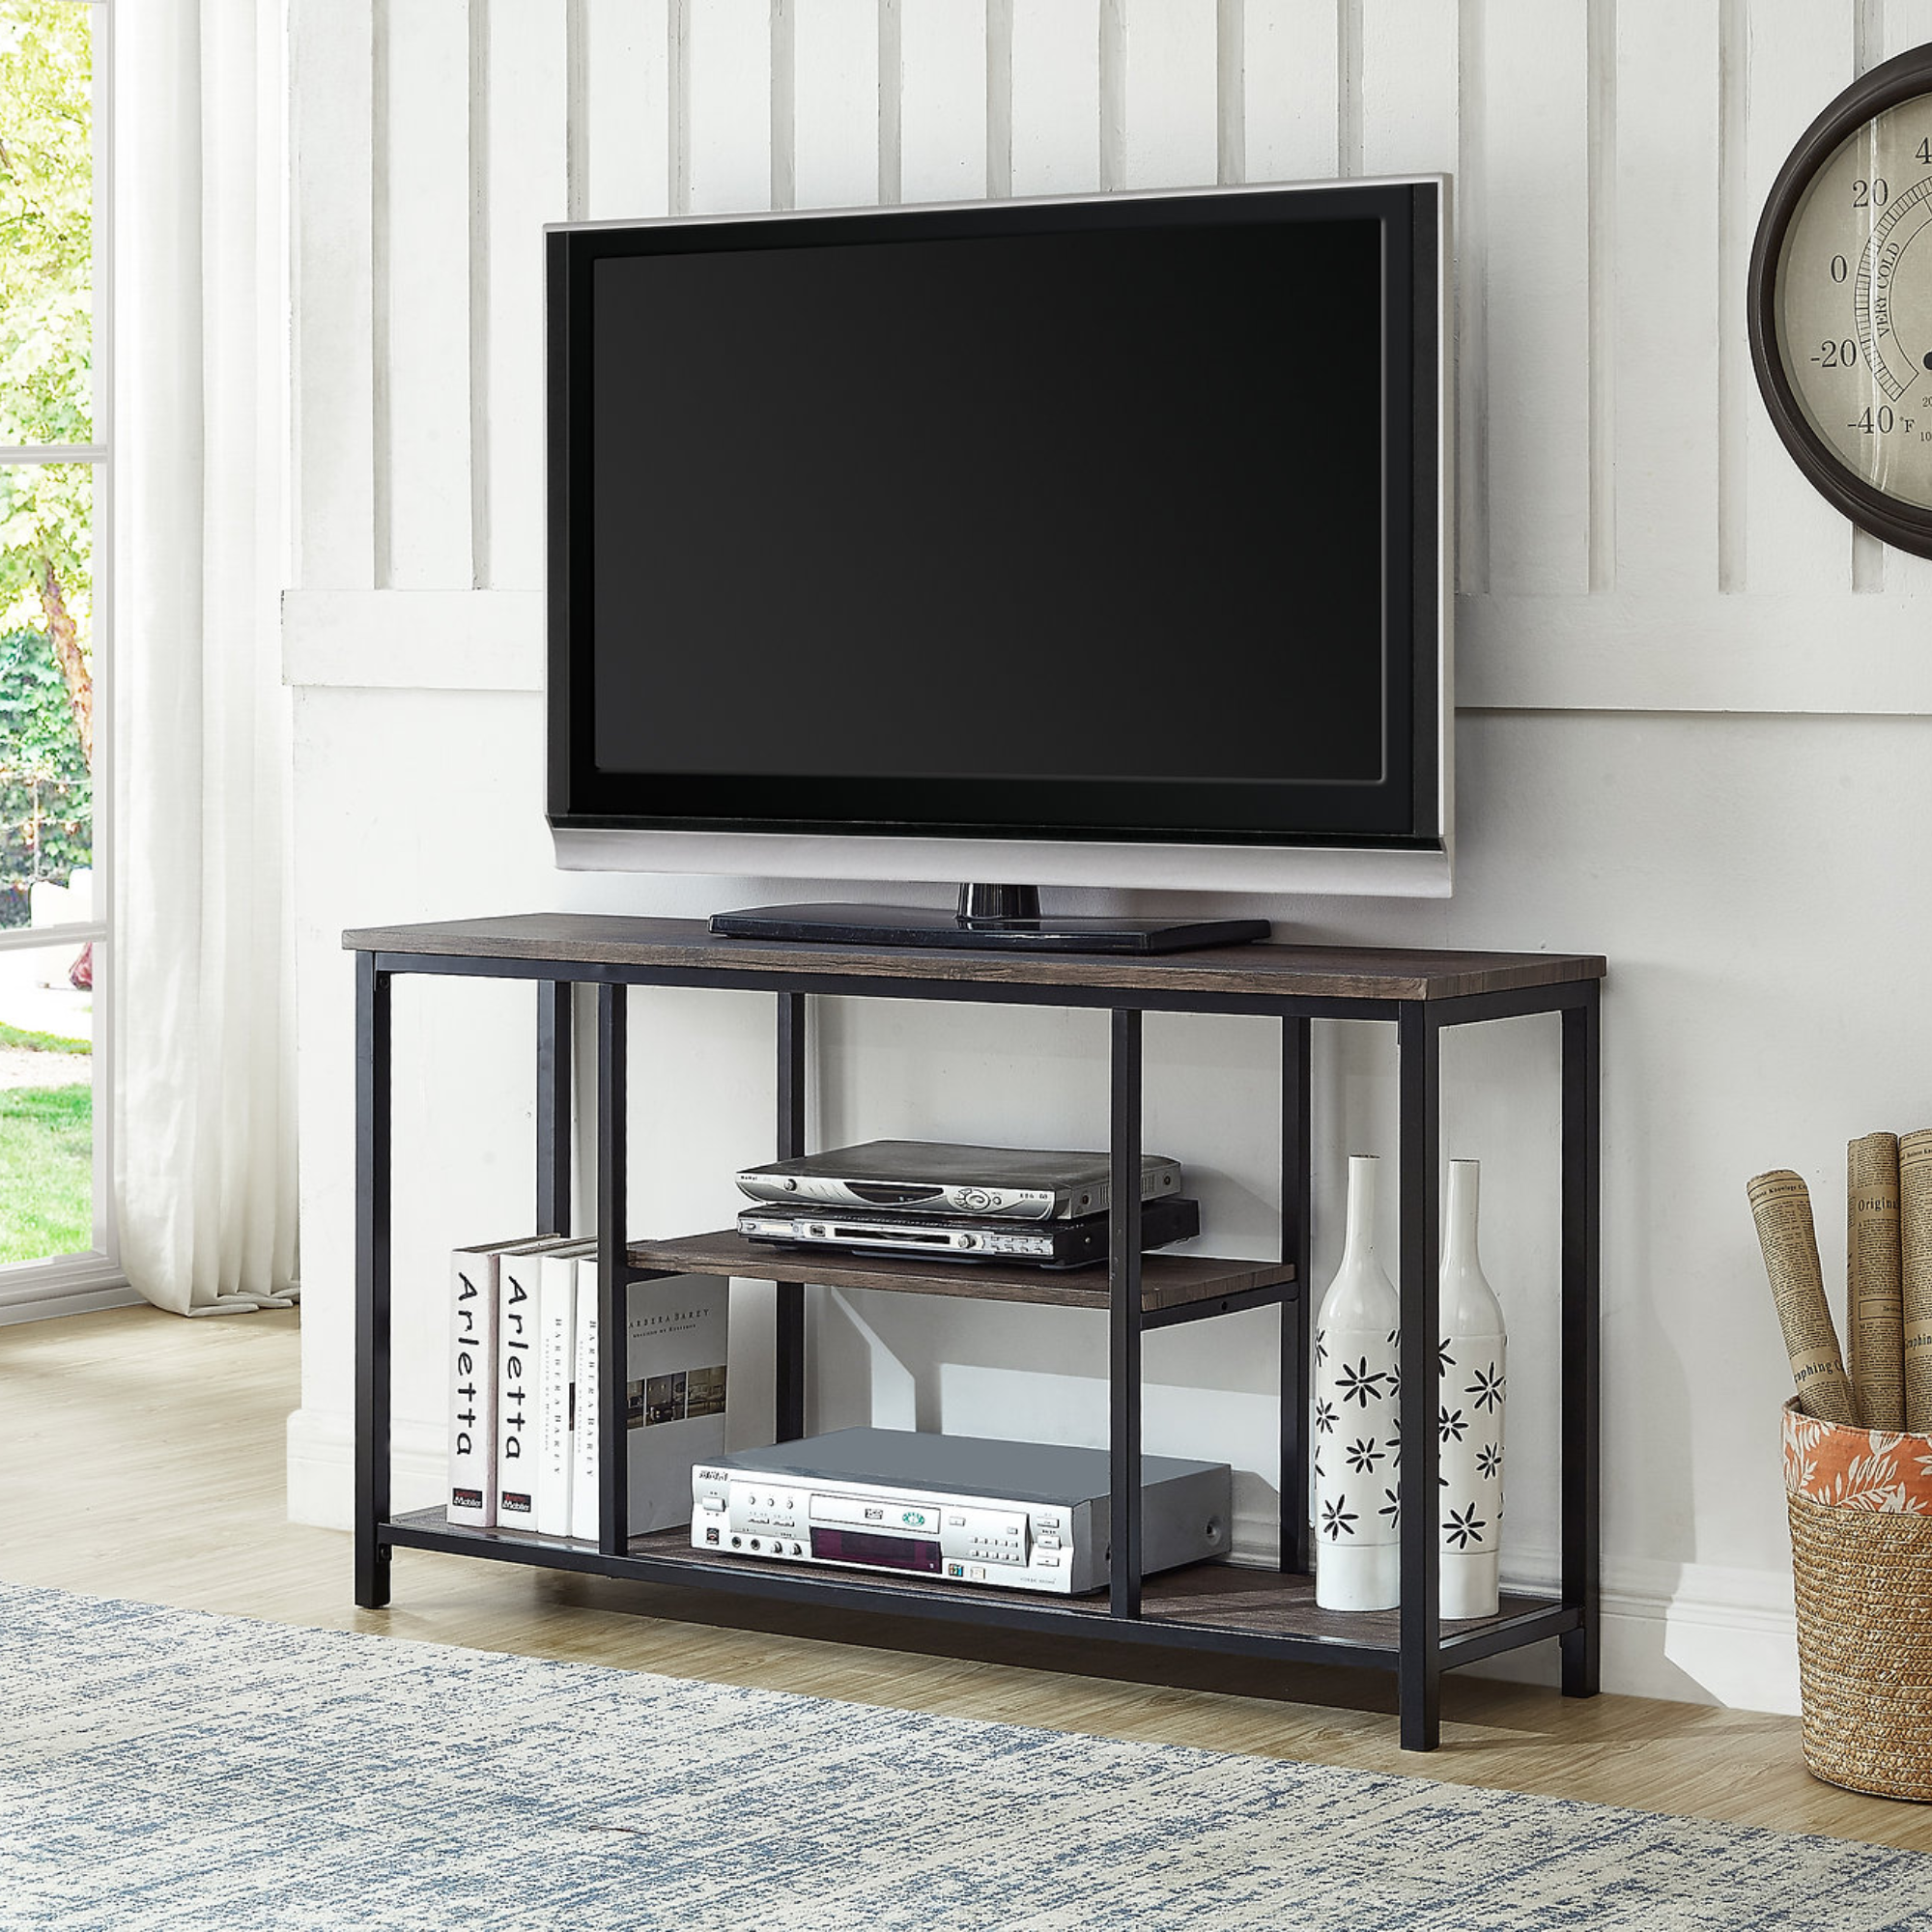 IF-5032 TV Stand